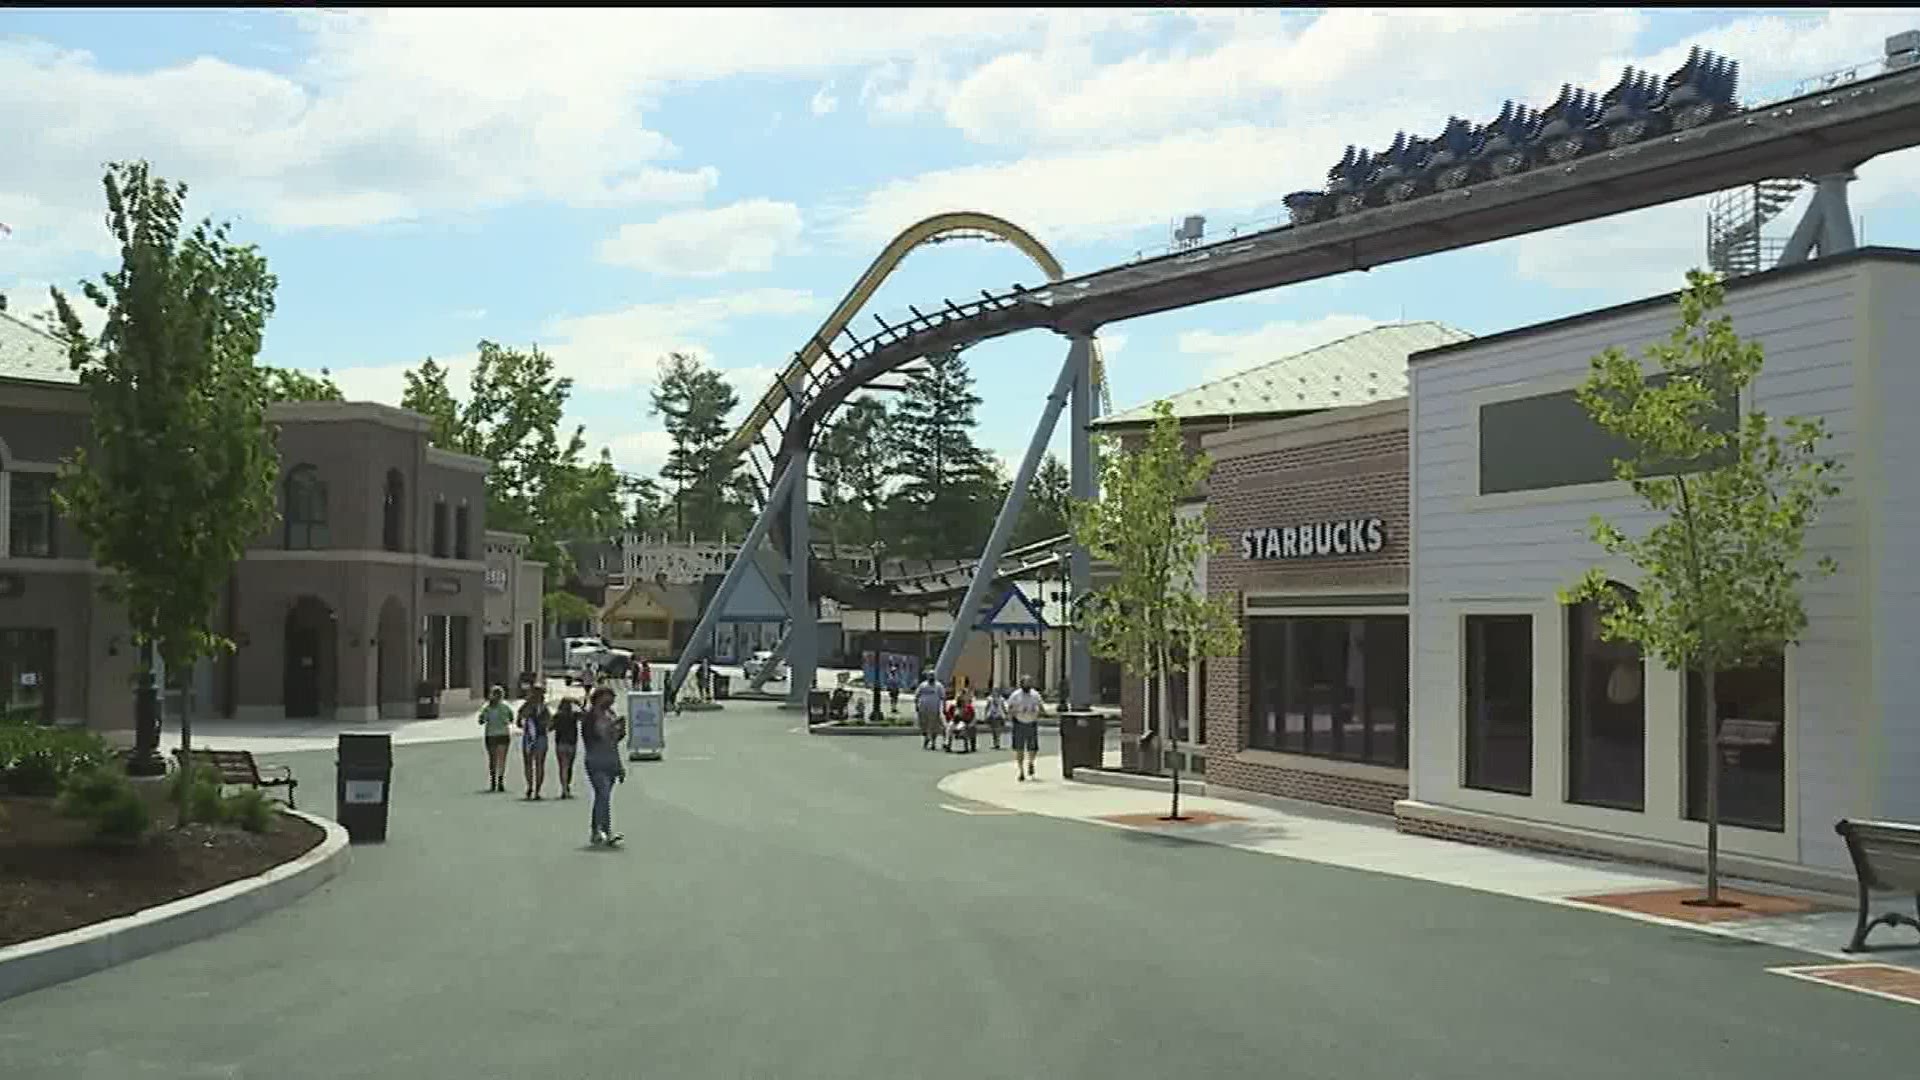 Hersheypark is debuting its new look and new coaster as it also debuts new safety procedures amid the COVID-19 crisis.